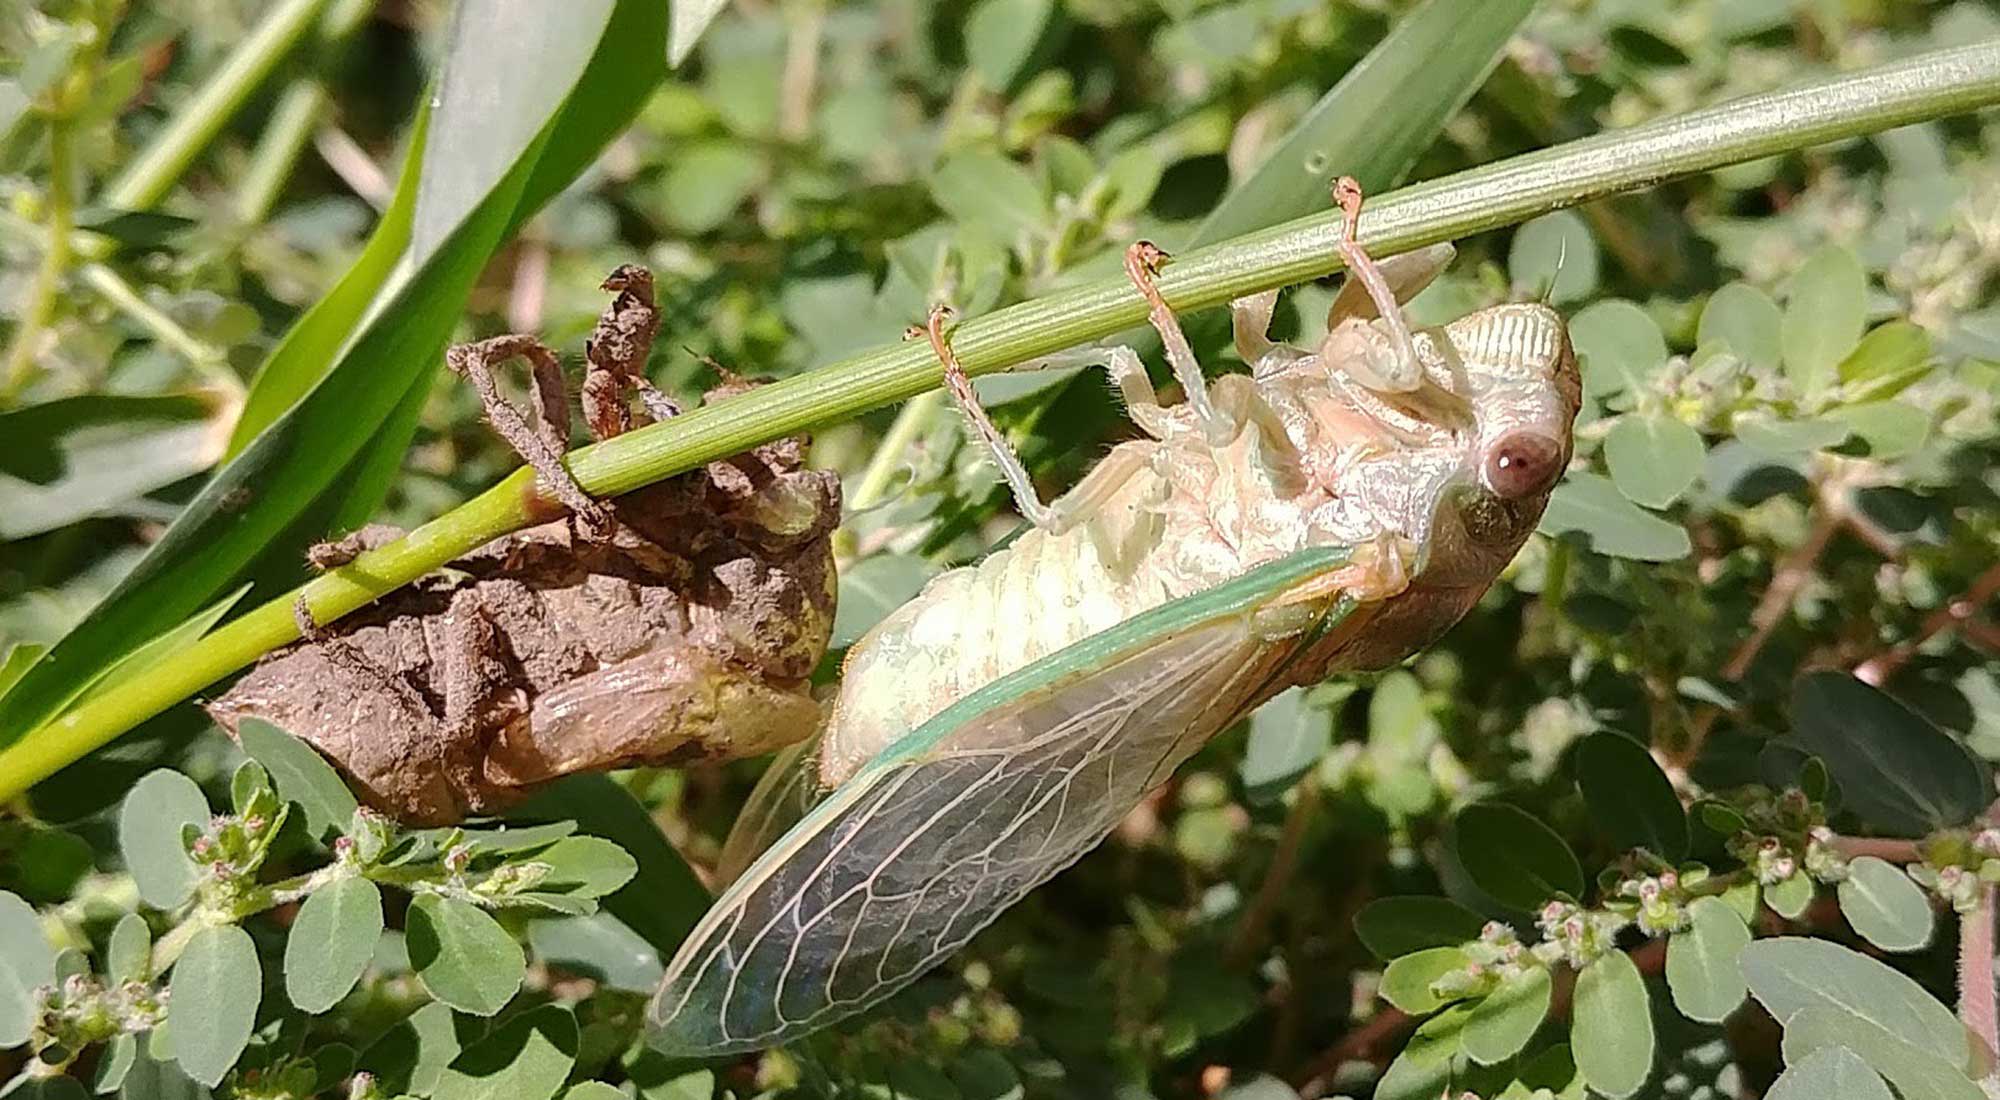 A pale green cicada hanging on a green stem with a brown dirt covered shell behind it.